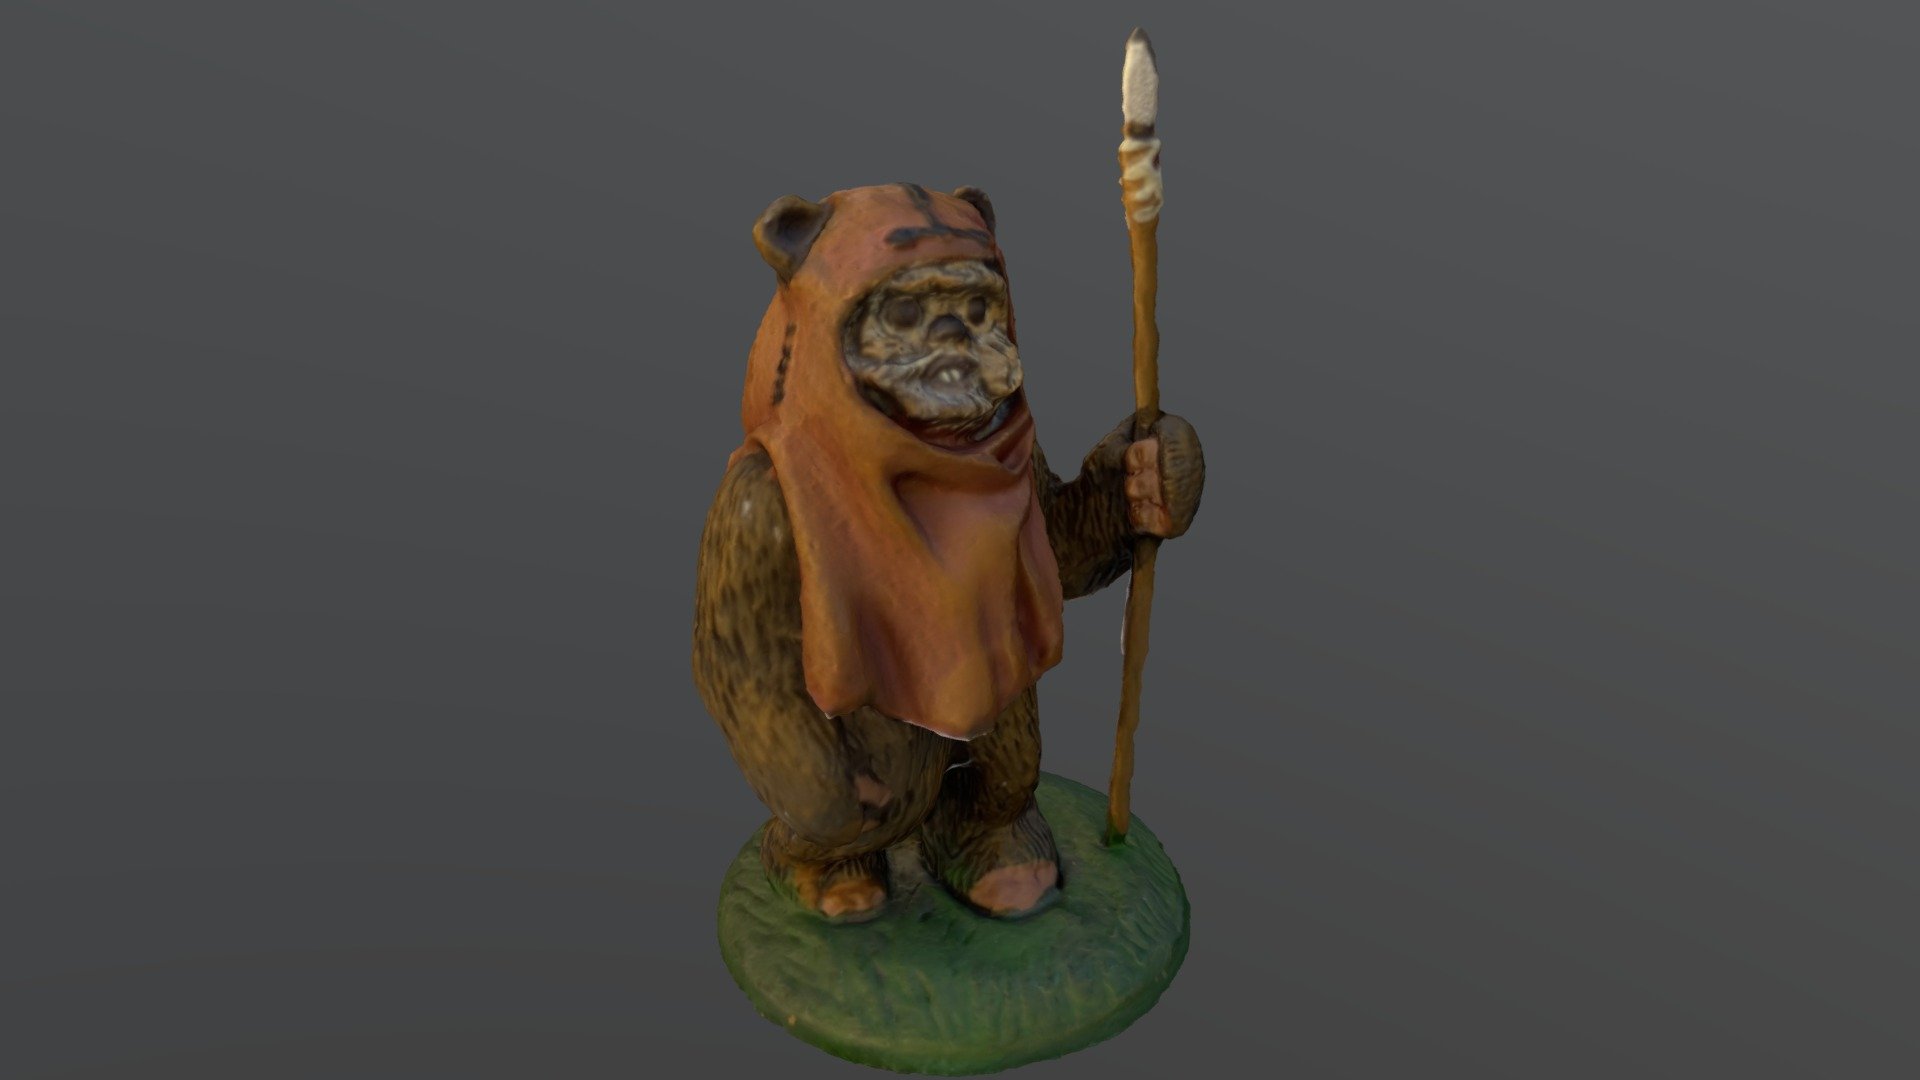 A miniature lead statue of Ewok, a character from the Star Wars franchise, captured with RealityScan photogrammetry software 3d model